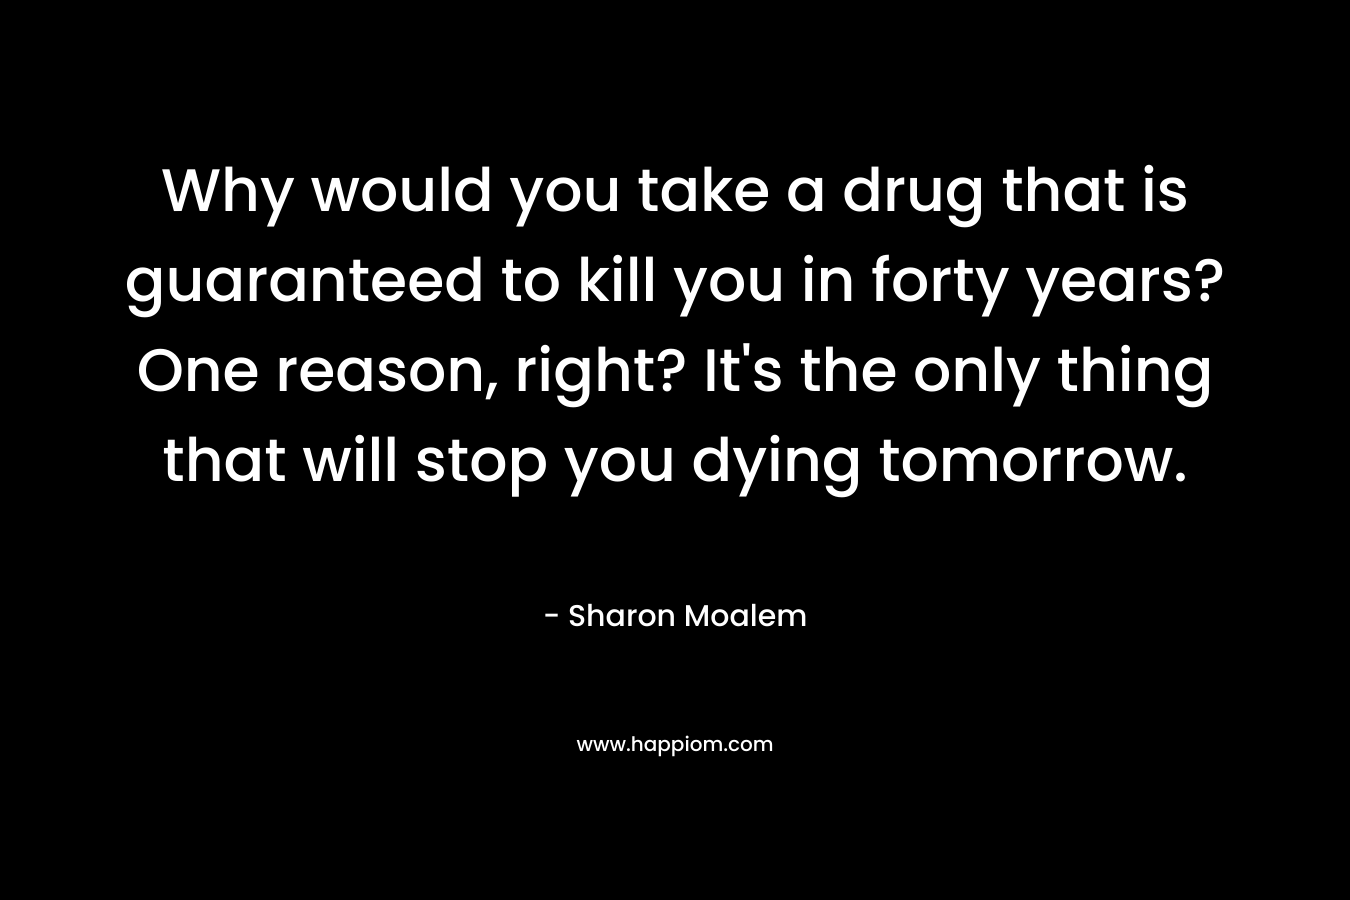 Why would you take a drug that is guaranteed to kill you in forty years? One reason, right? It's the only thing that will stop you dying tomorrow.